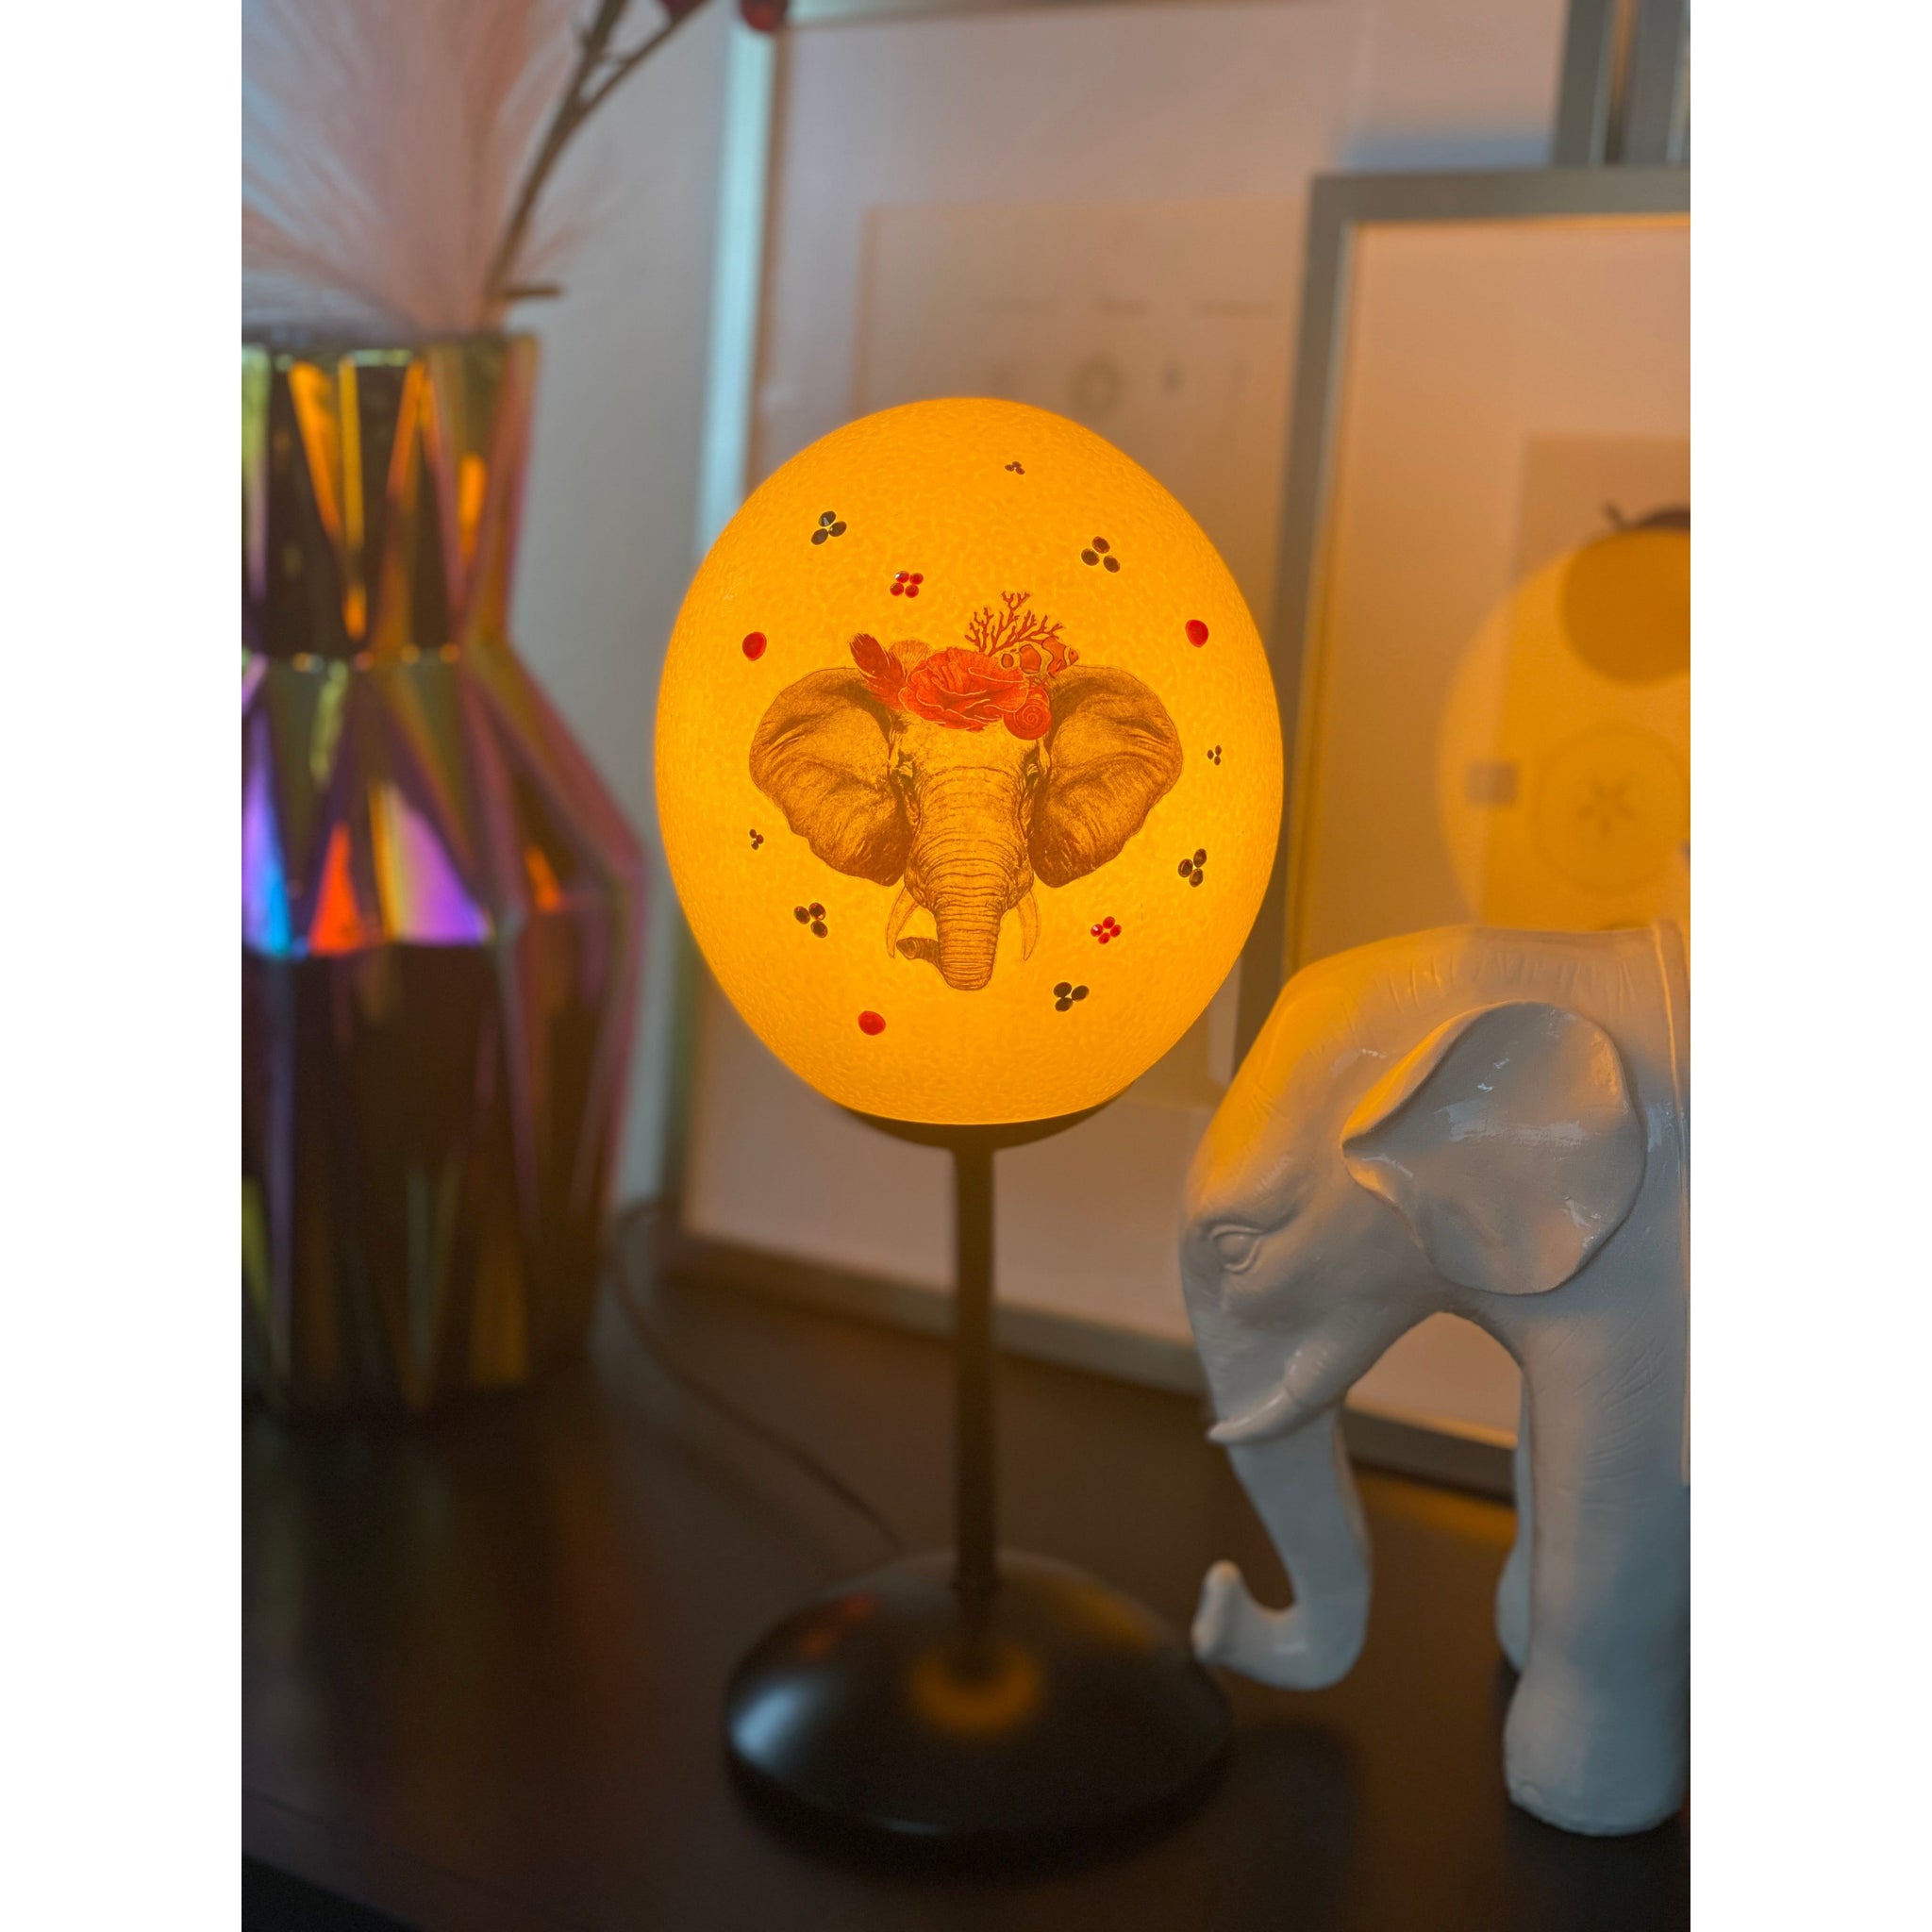 "Elephant" table lamp, artfully decorated with a real ostrich egg